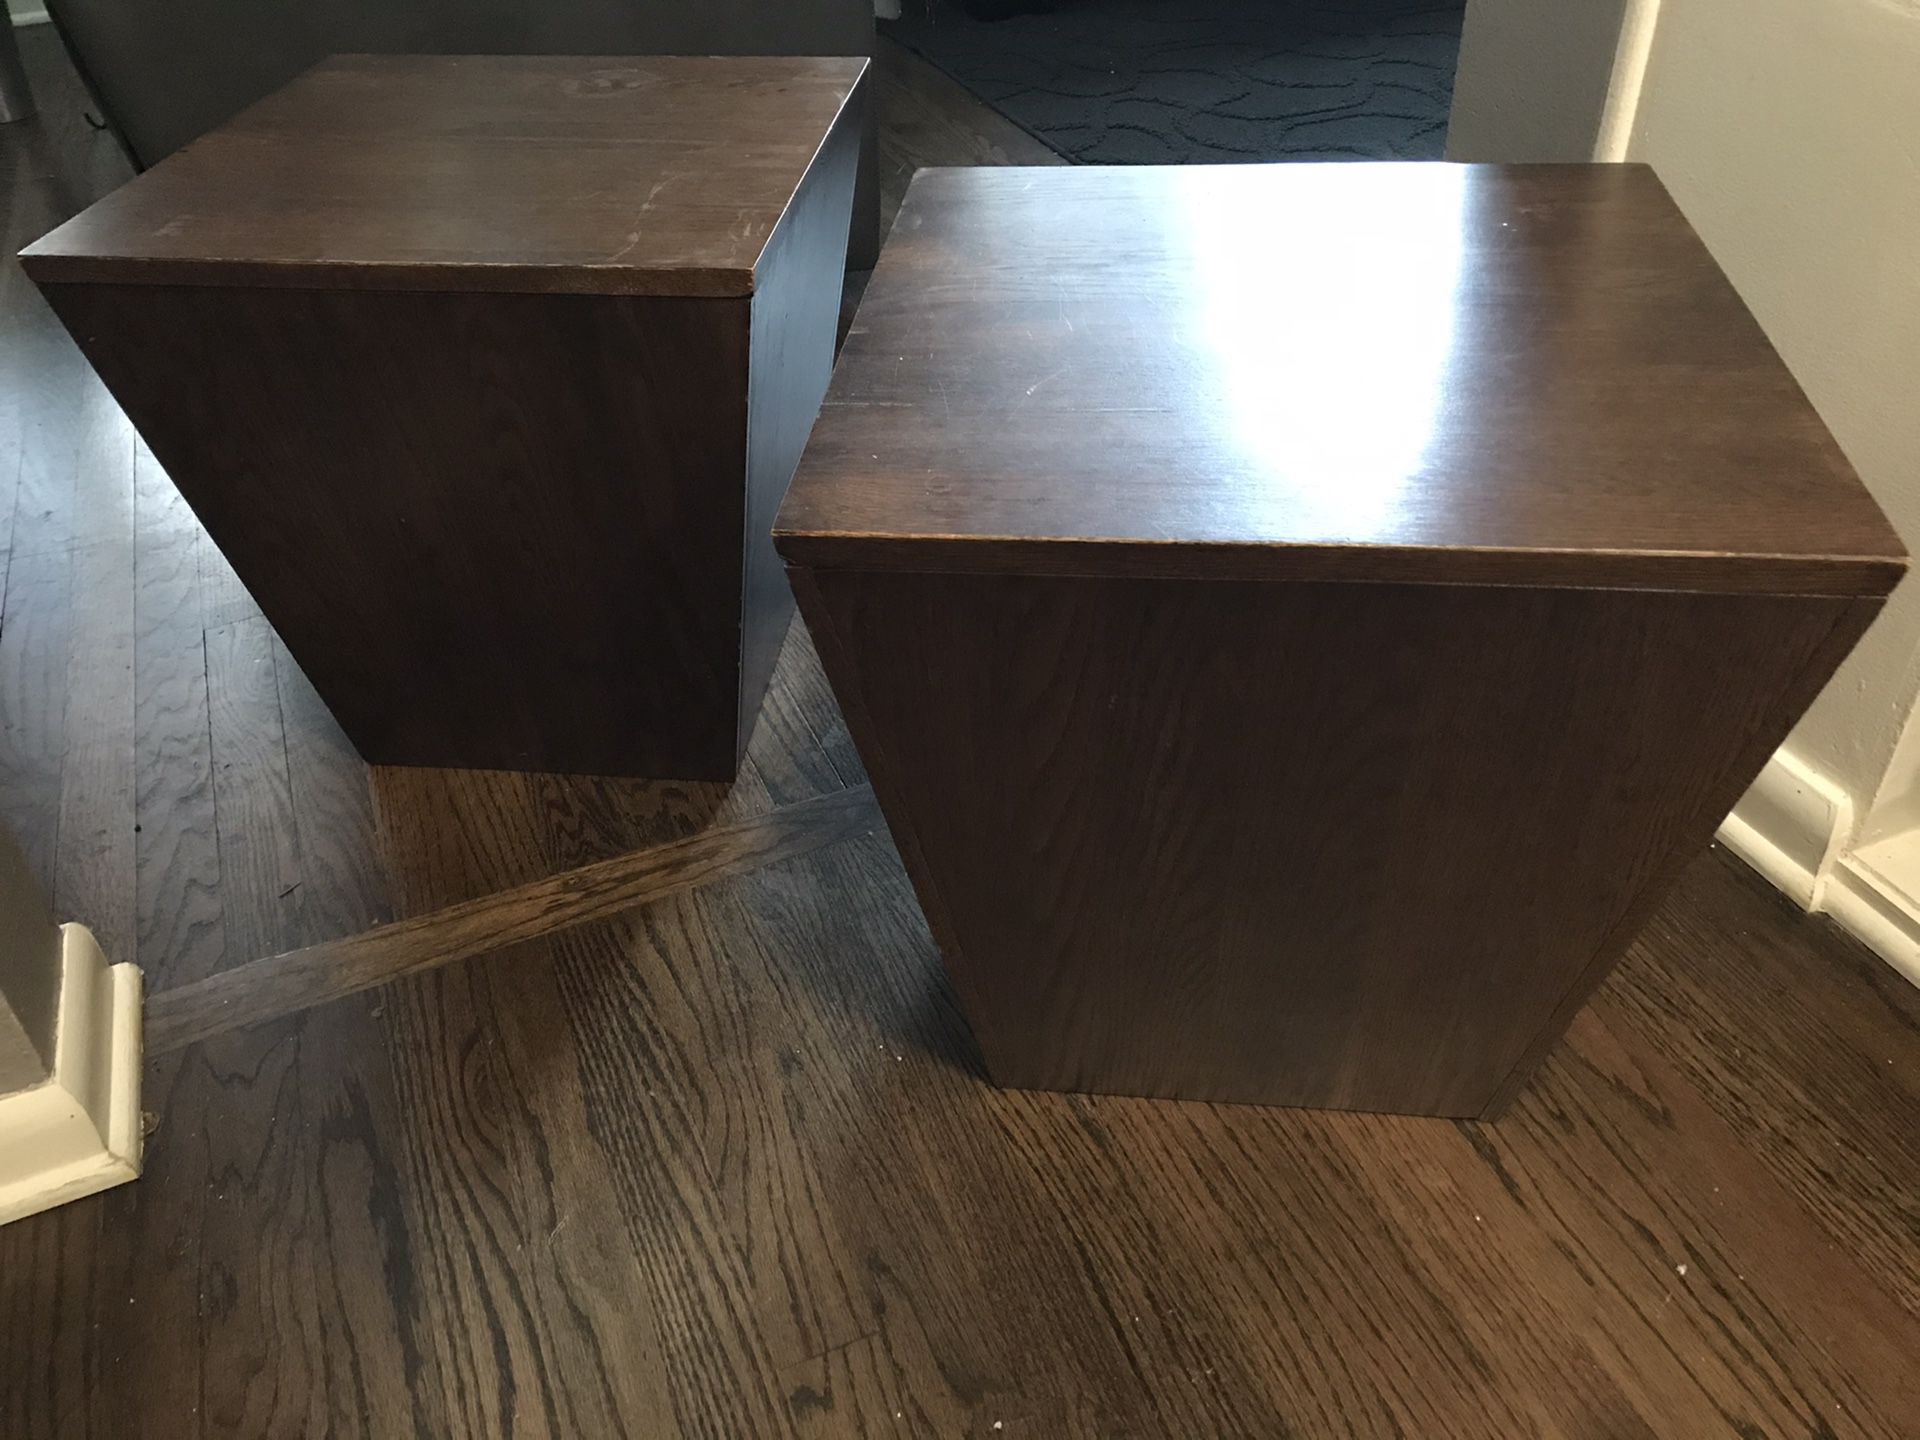 Crate and Barrel Two Side Tables/End Tables with inside storage